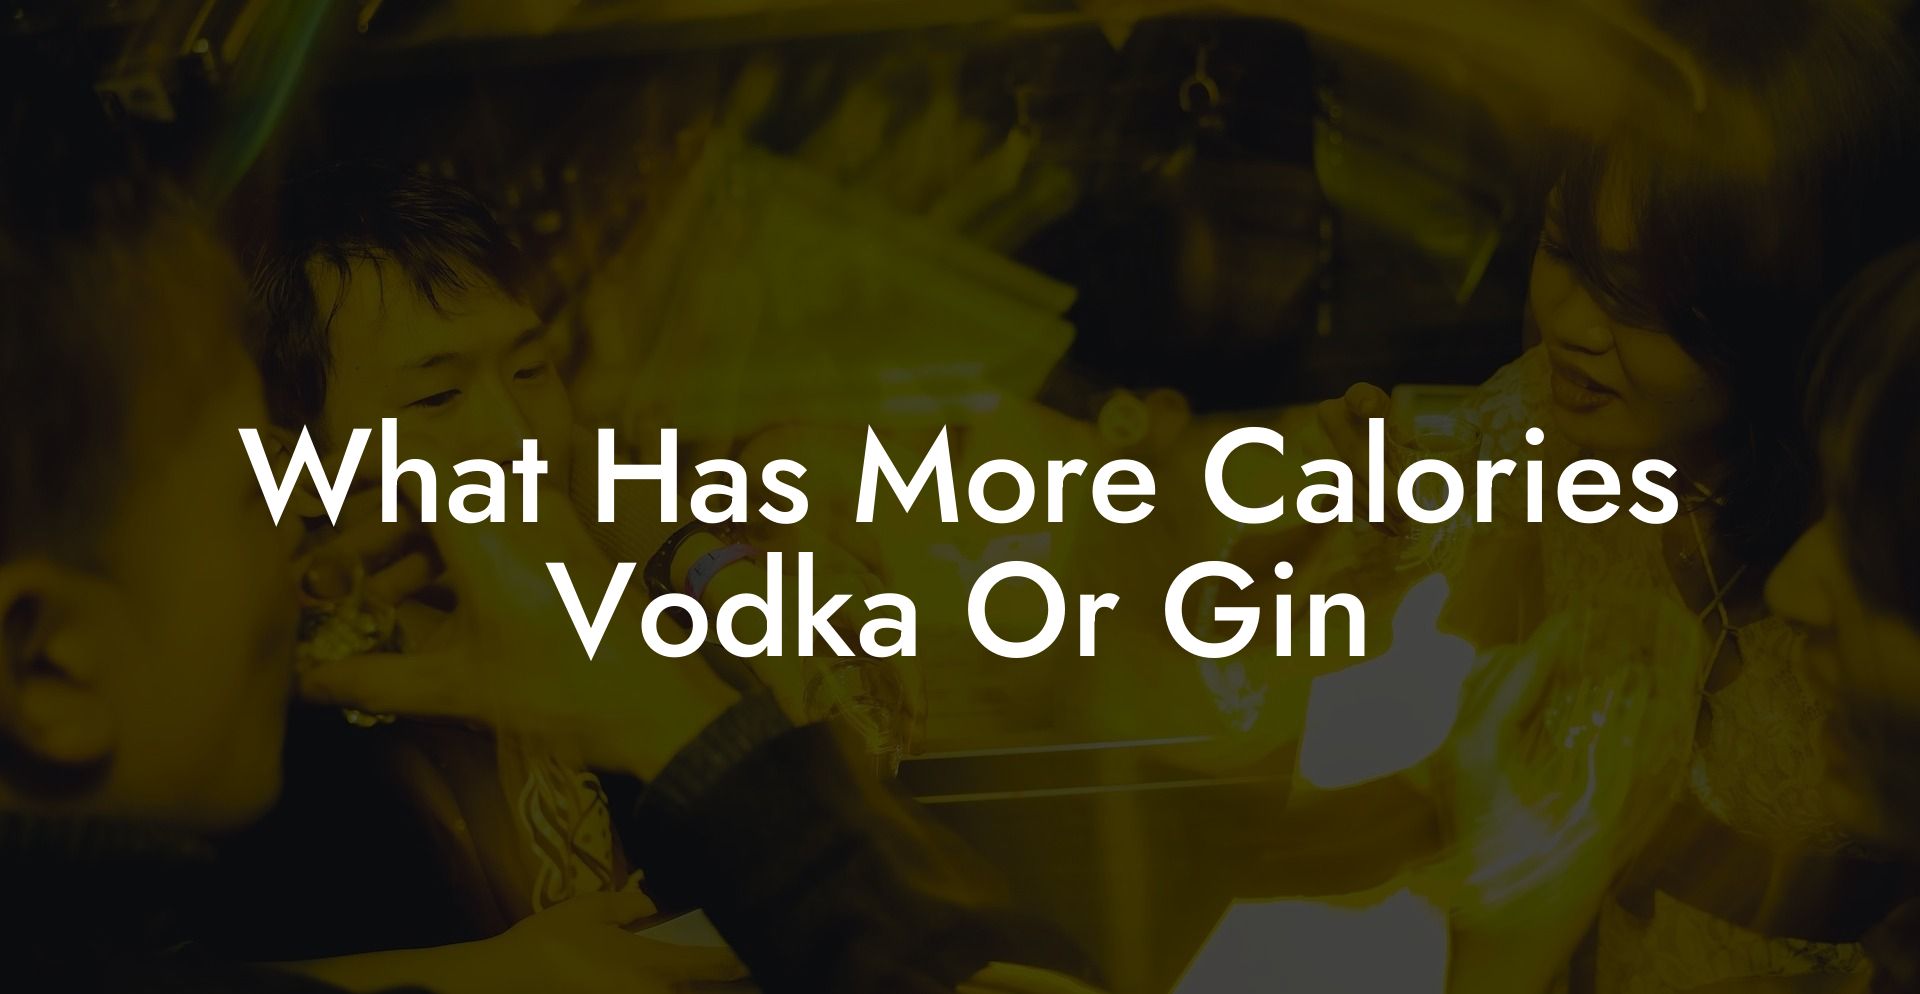 What Has More Calories Vodka Or Gin